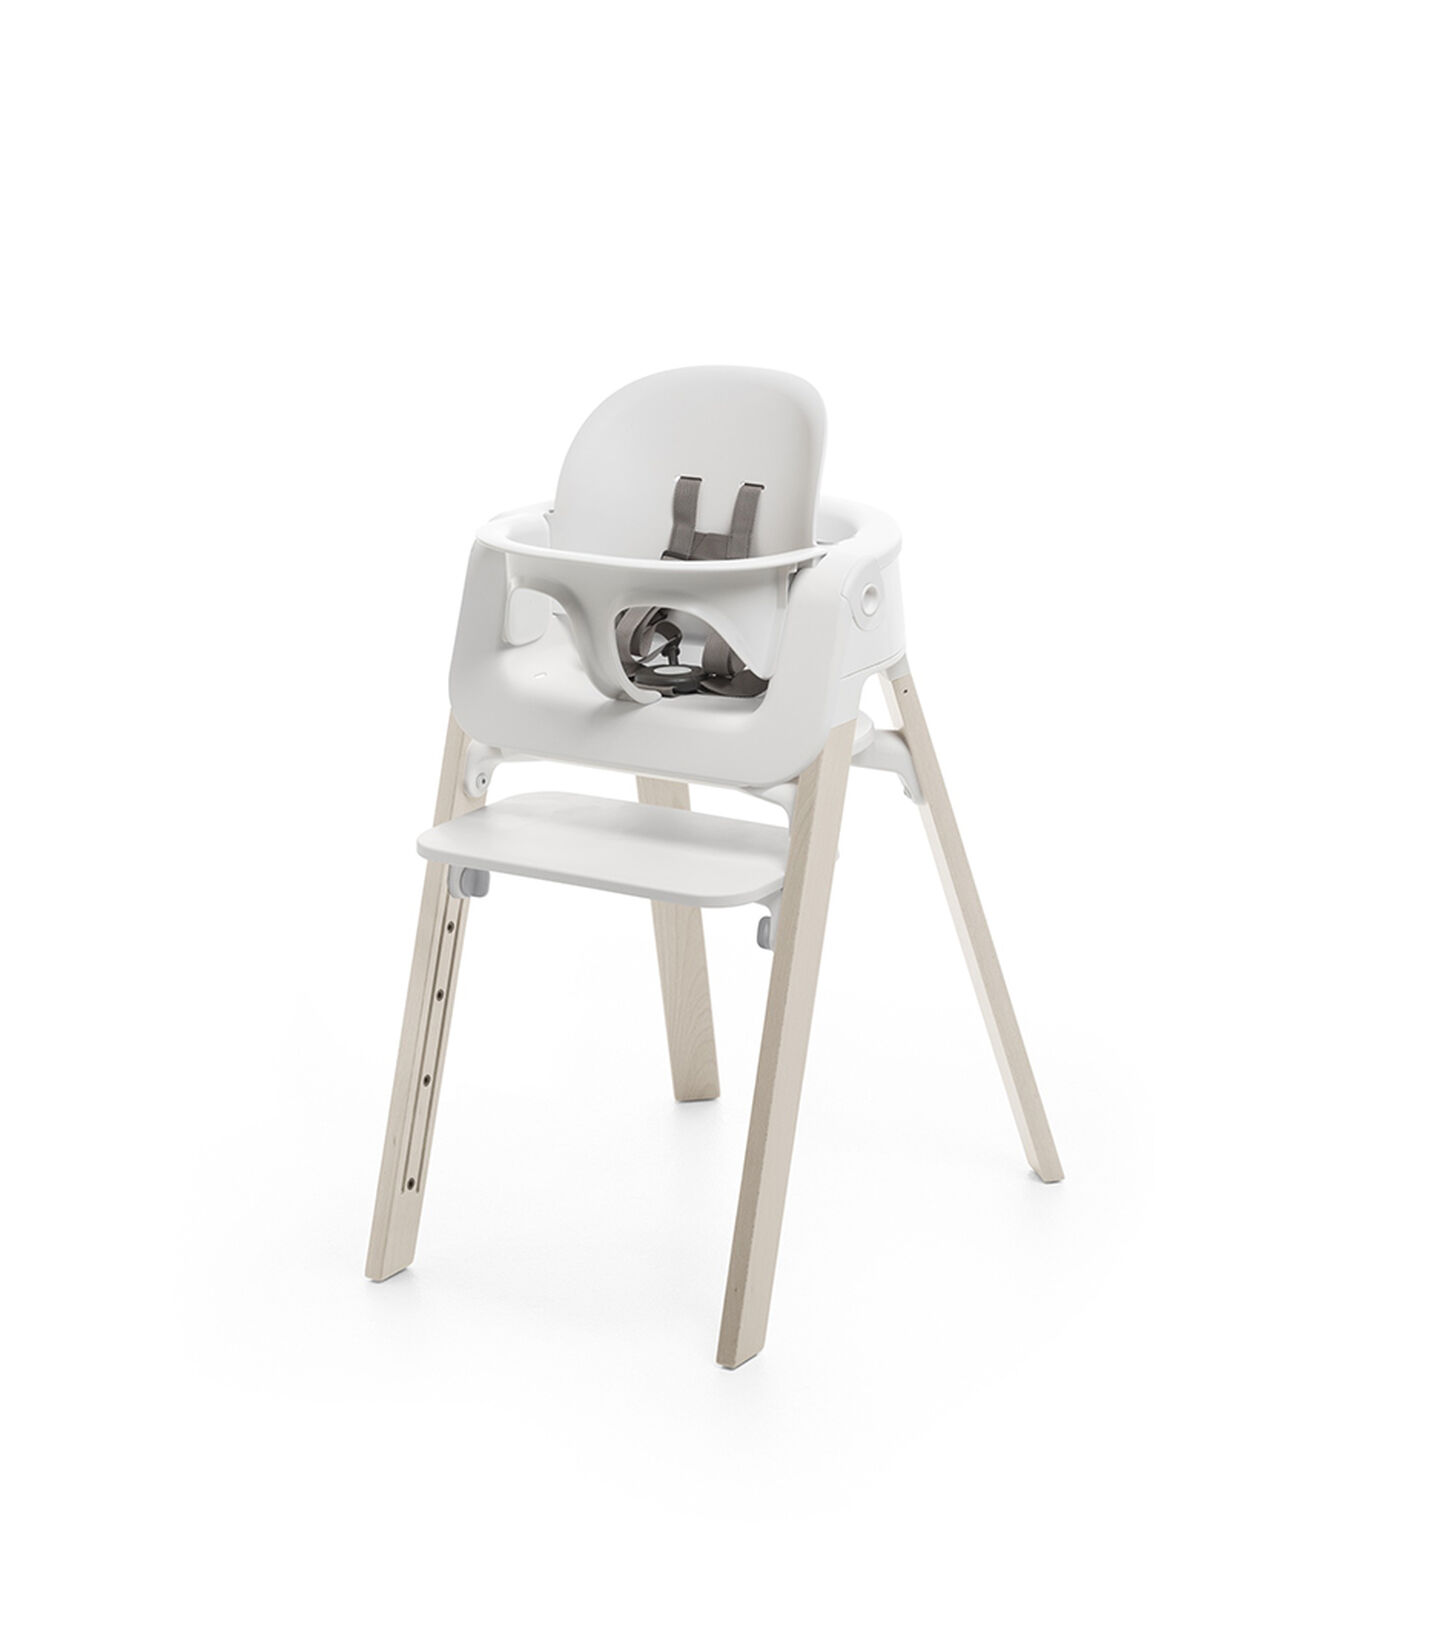 Stokke® Steps™ Baby Set in de kleur White, Wit, mainview view 3